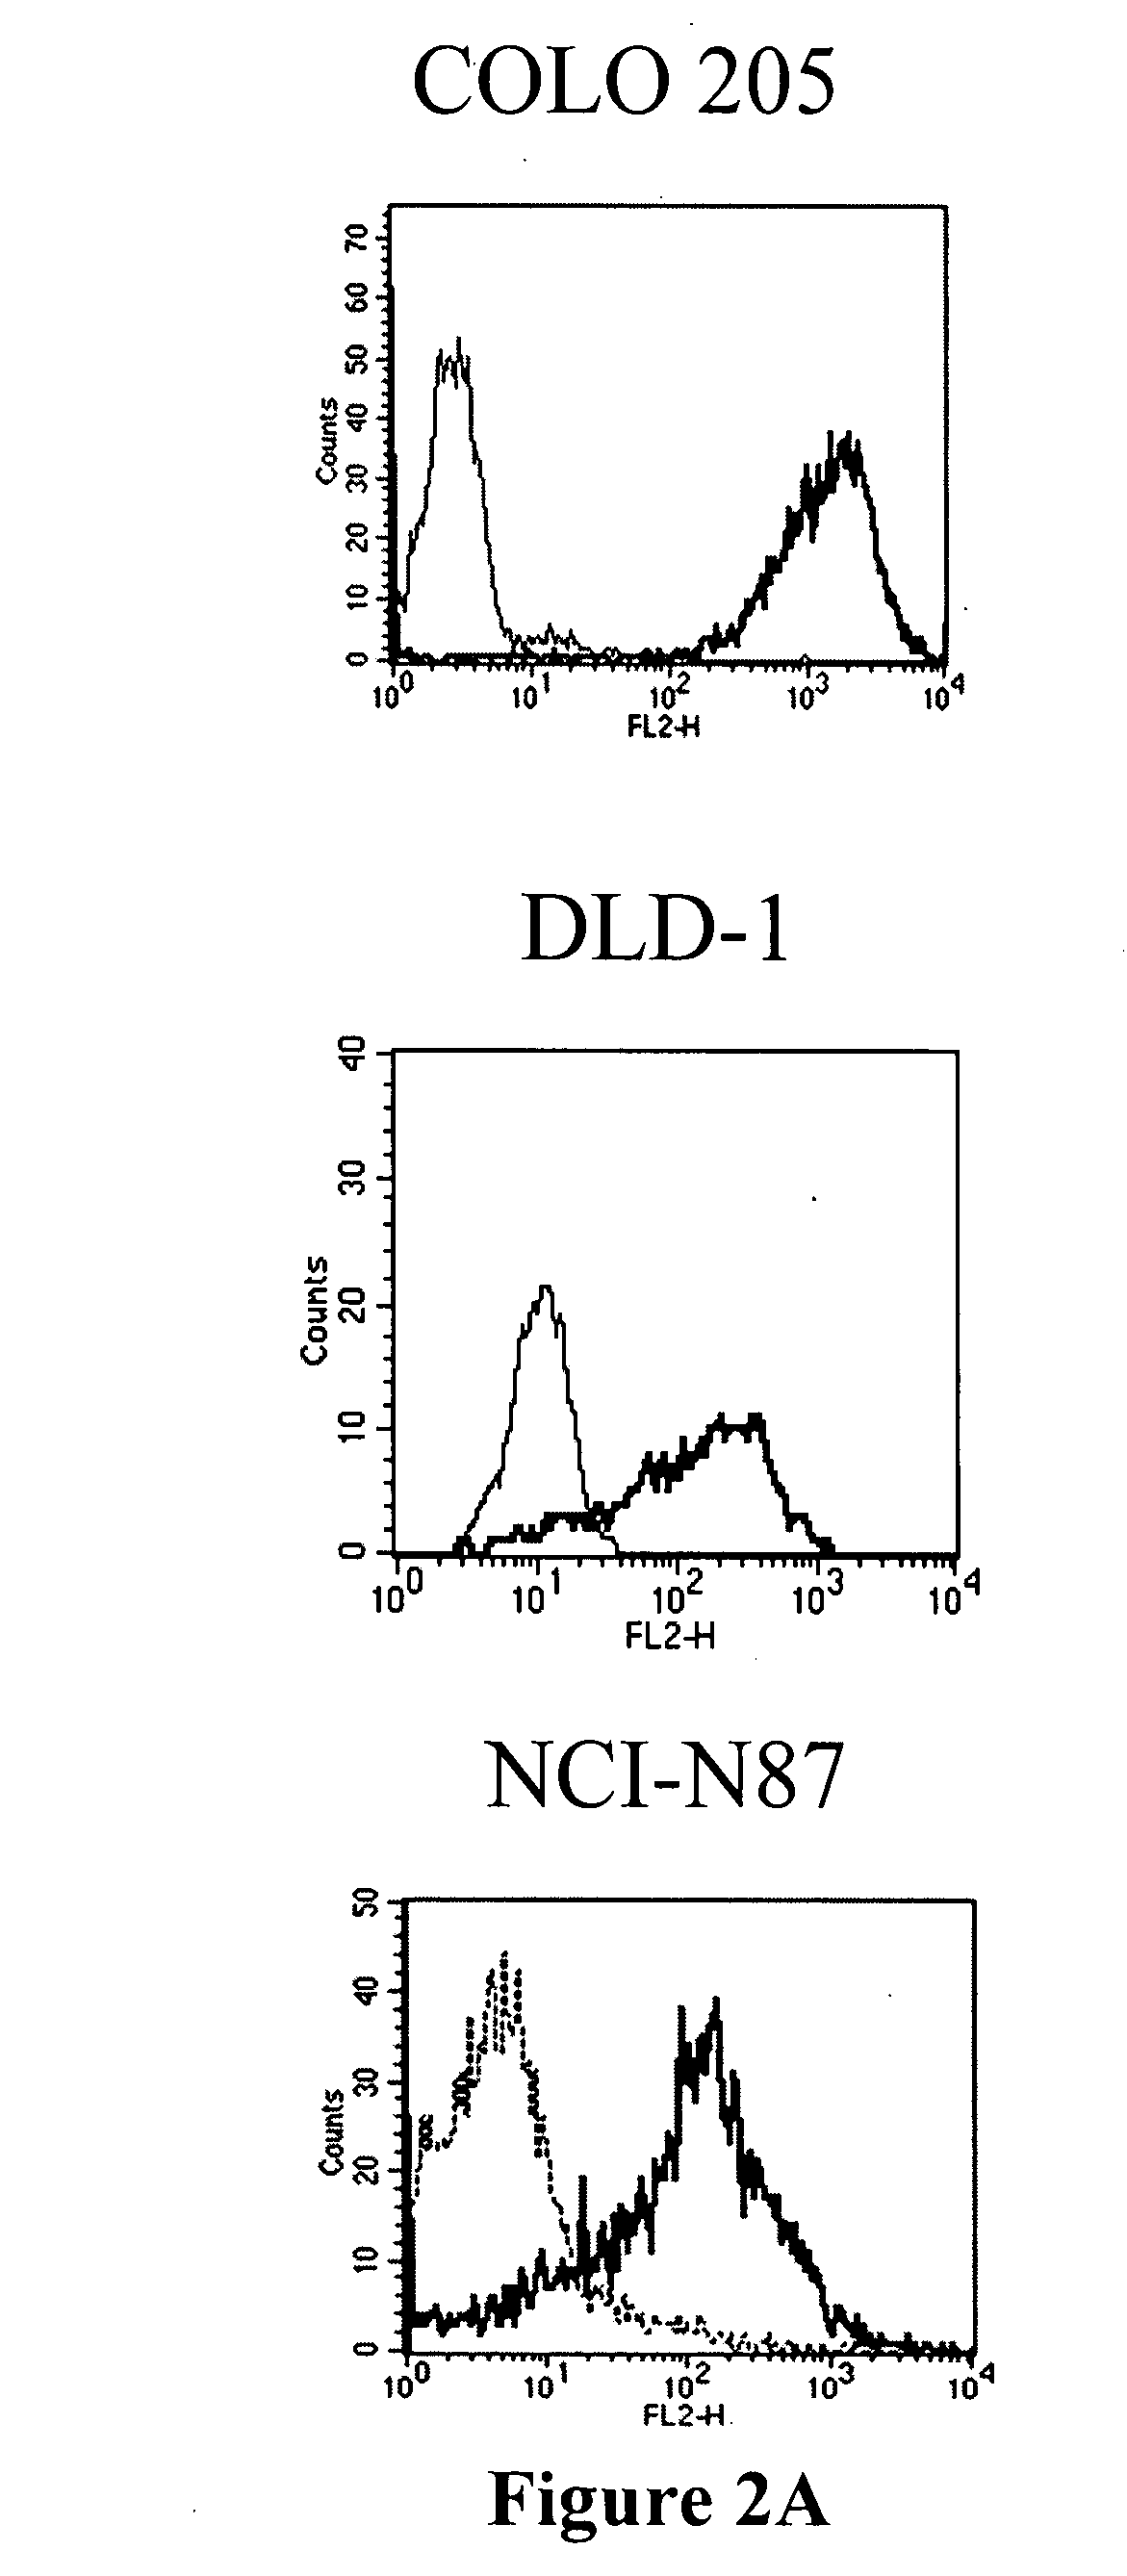 Antibodies recognizing a carbohydrate containing epitope on CD-43 and CEA expressed on cancer cells and methods using same